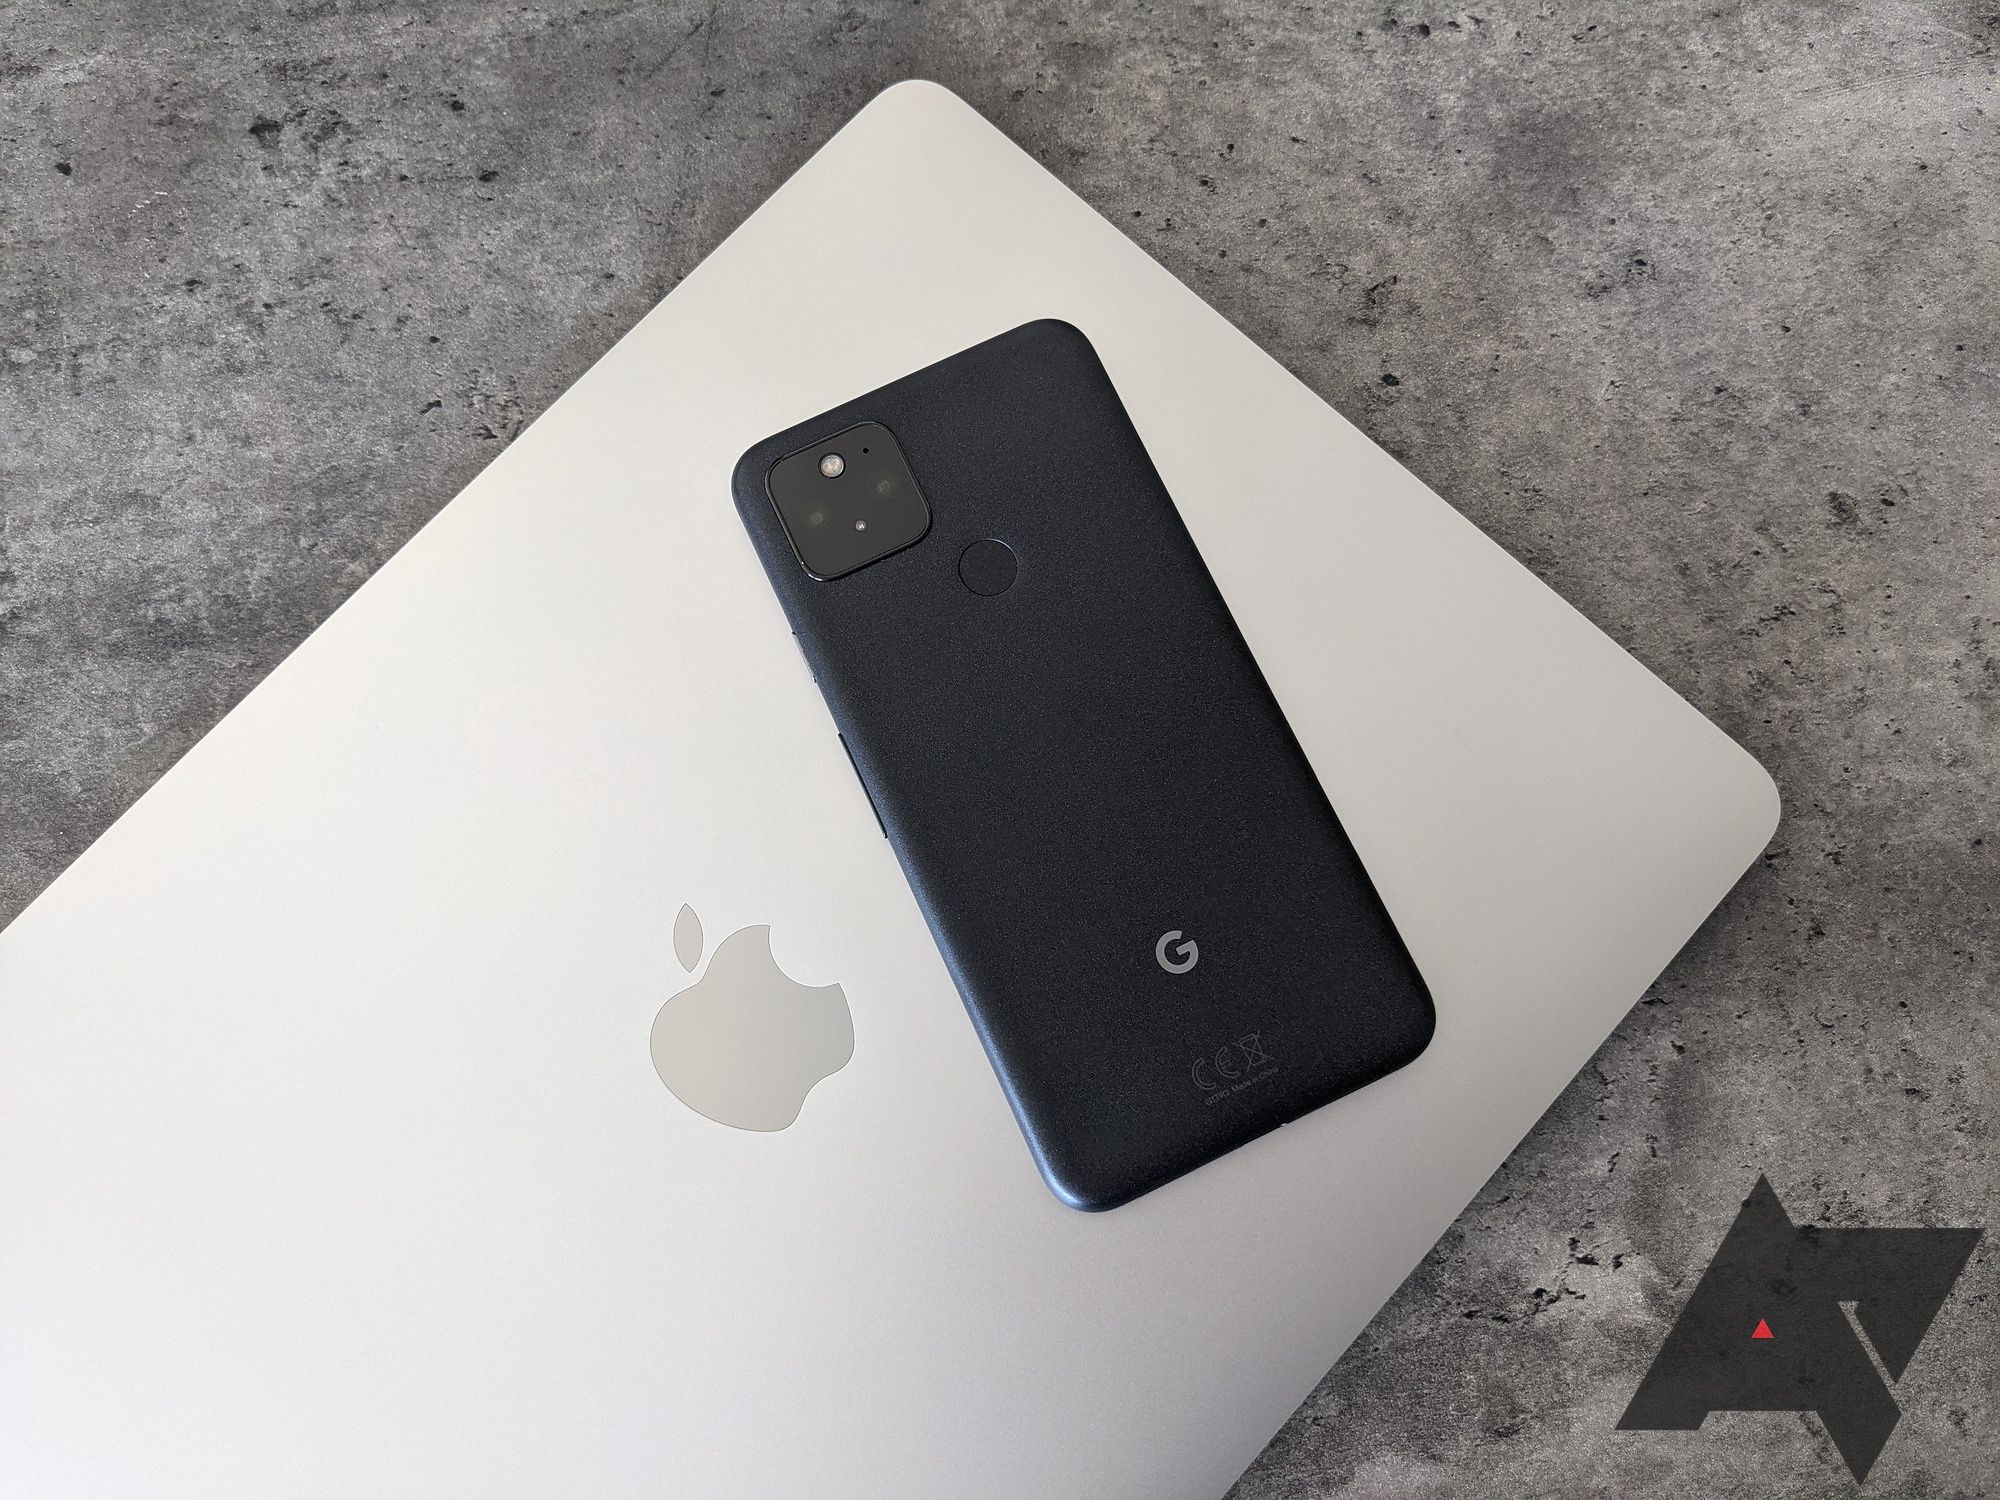 A Google Pixel smartphone sits on top of a silver Apple MacBook Air